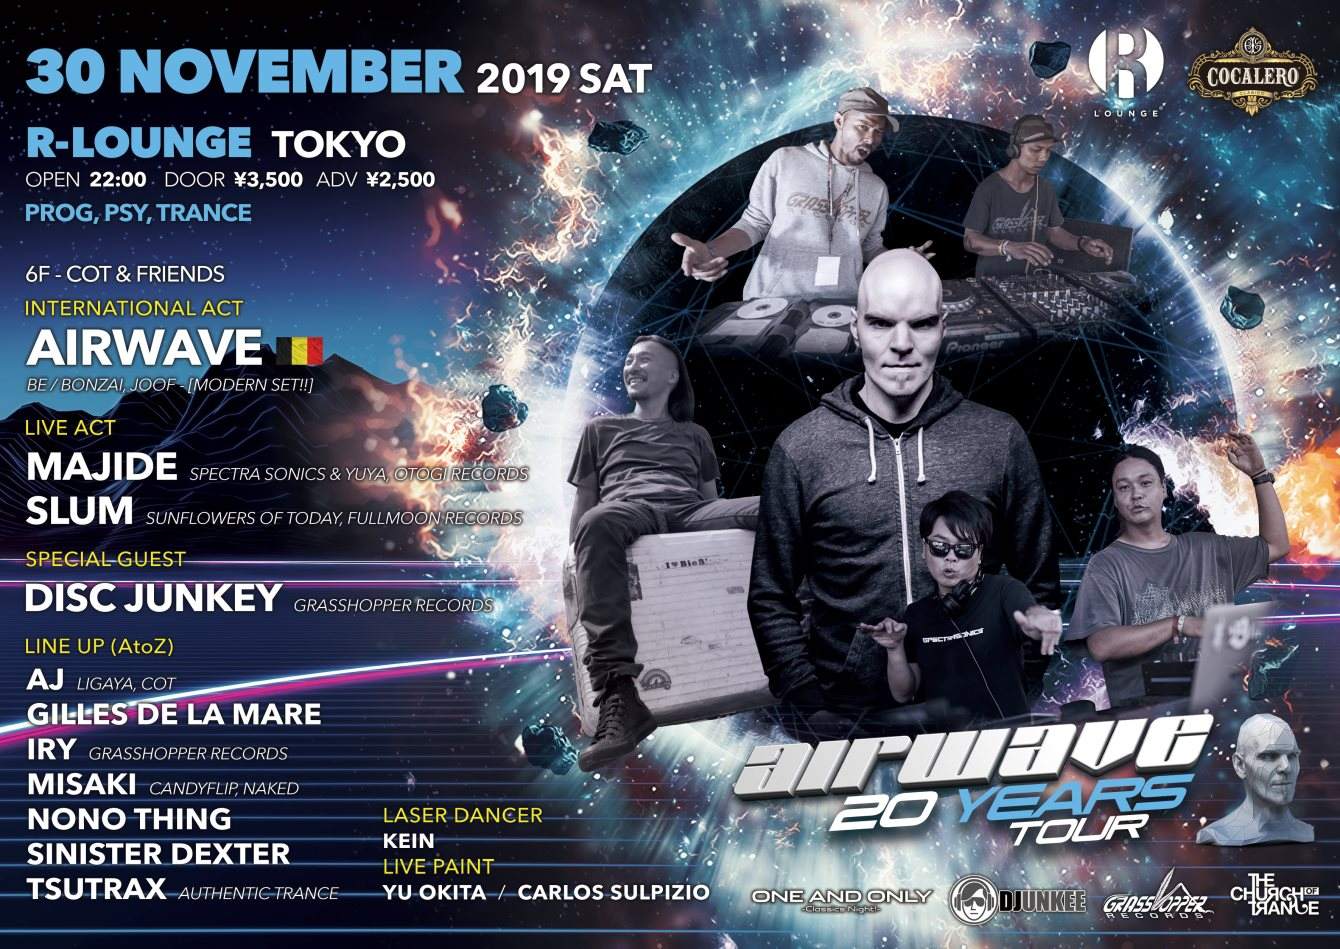 Airwave 20 Years - with Disc Junkey, Majide, Slum, and More - フライヤー表